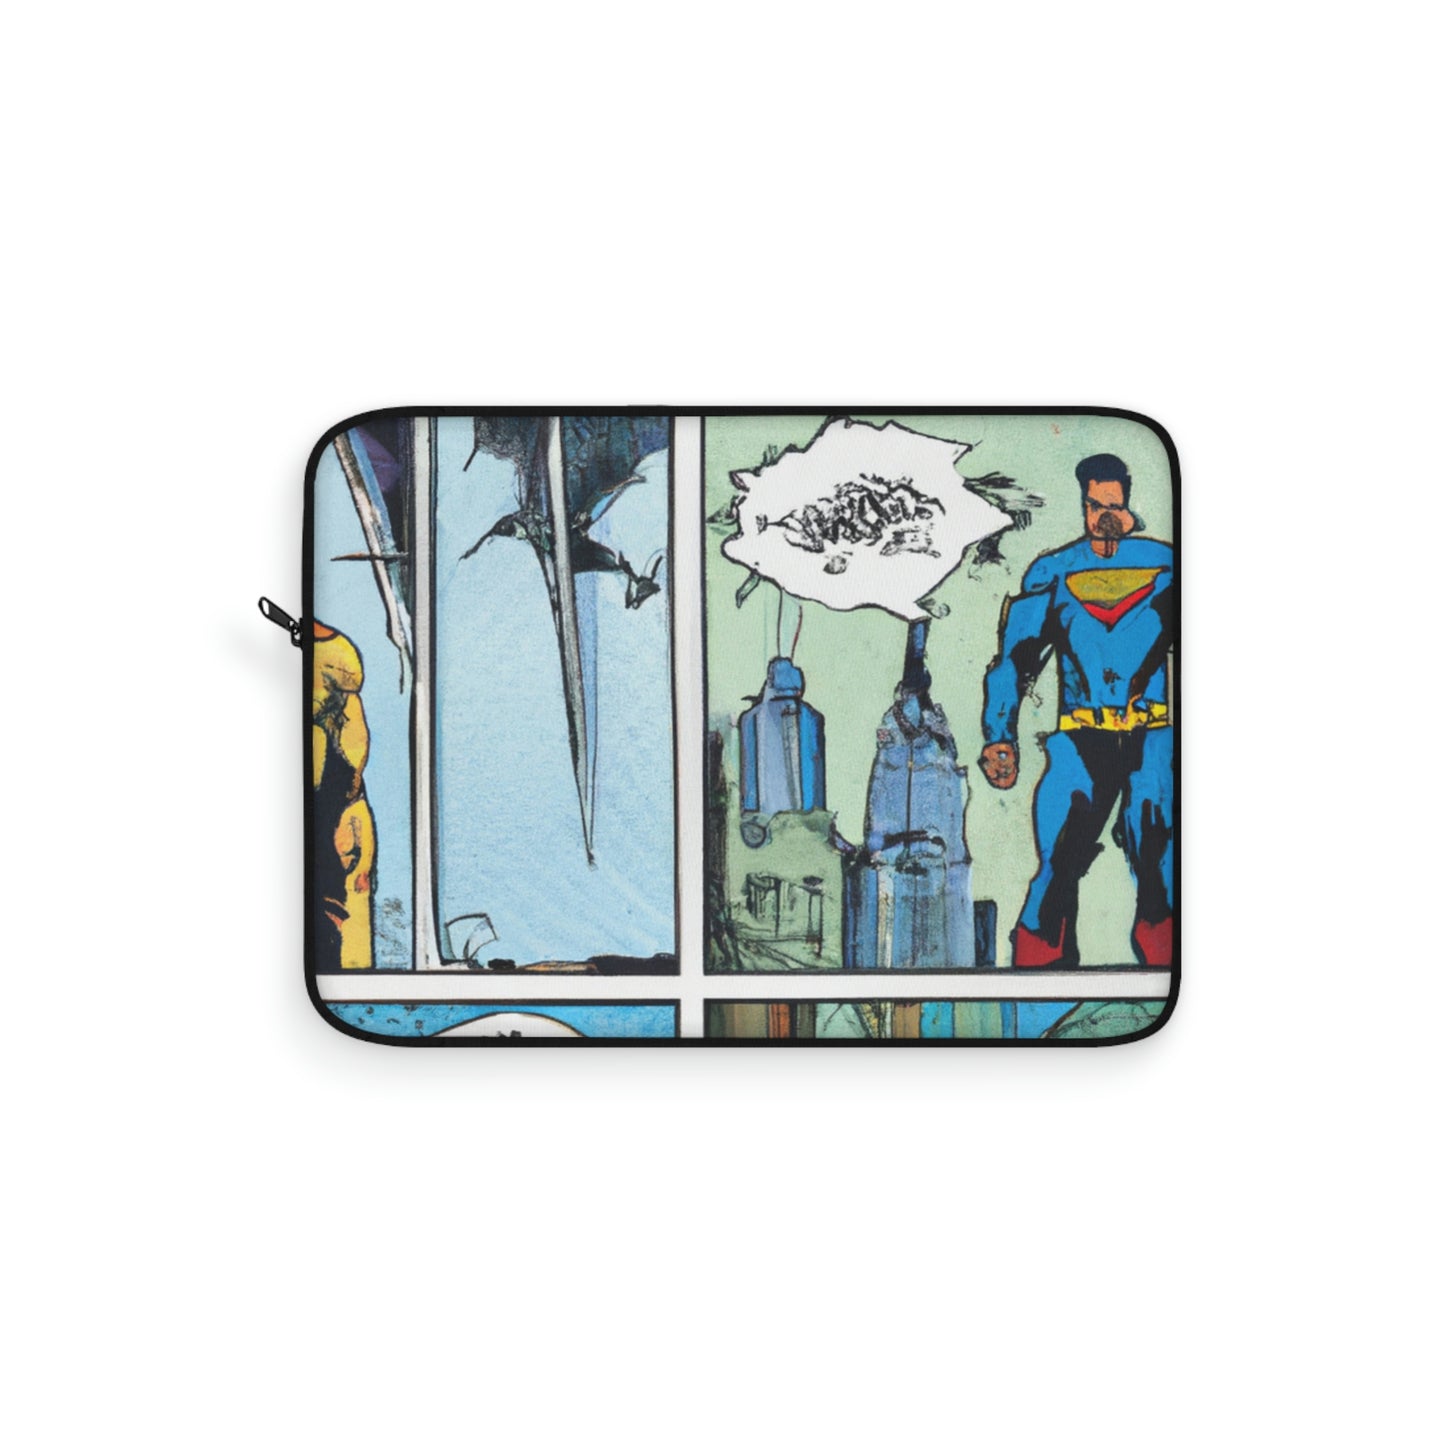 Gus the Great - Comic Book Collector Laptop Computer Sleeve Storage Case Bag